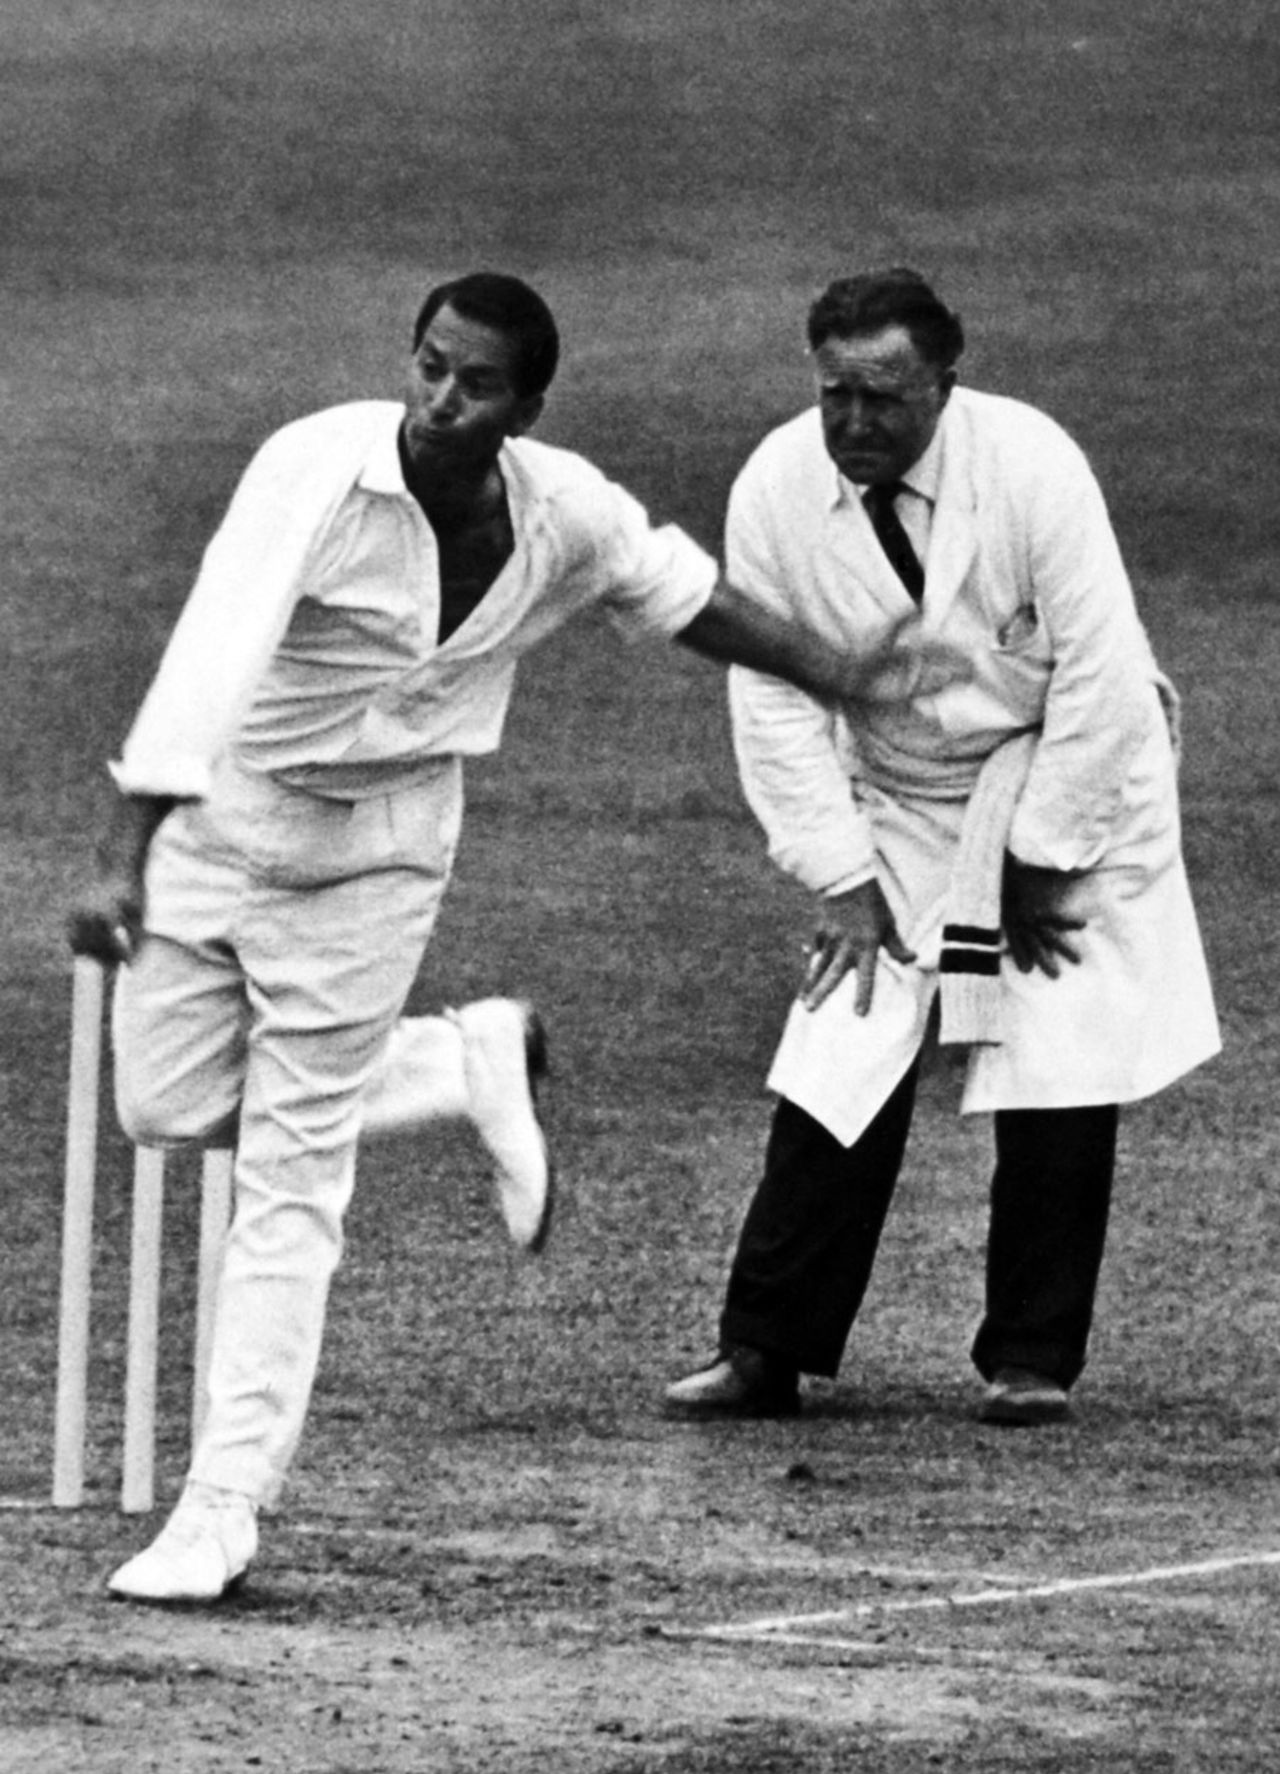 Basil D'Oliveira bowls for Worchestershire, August 25, 1966 